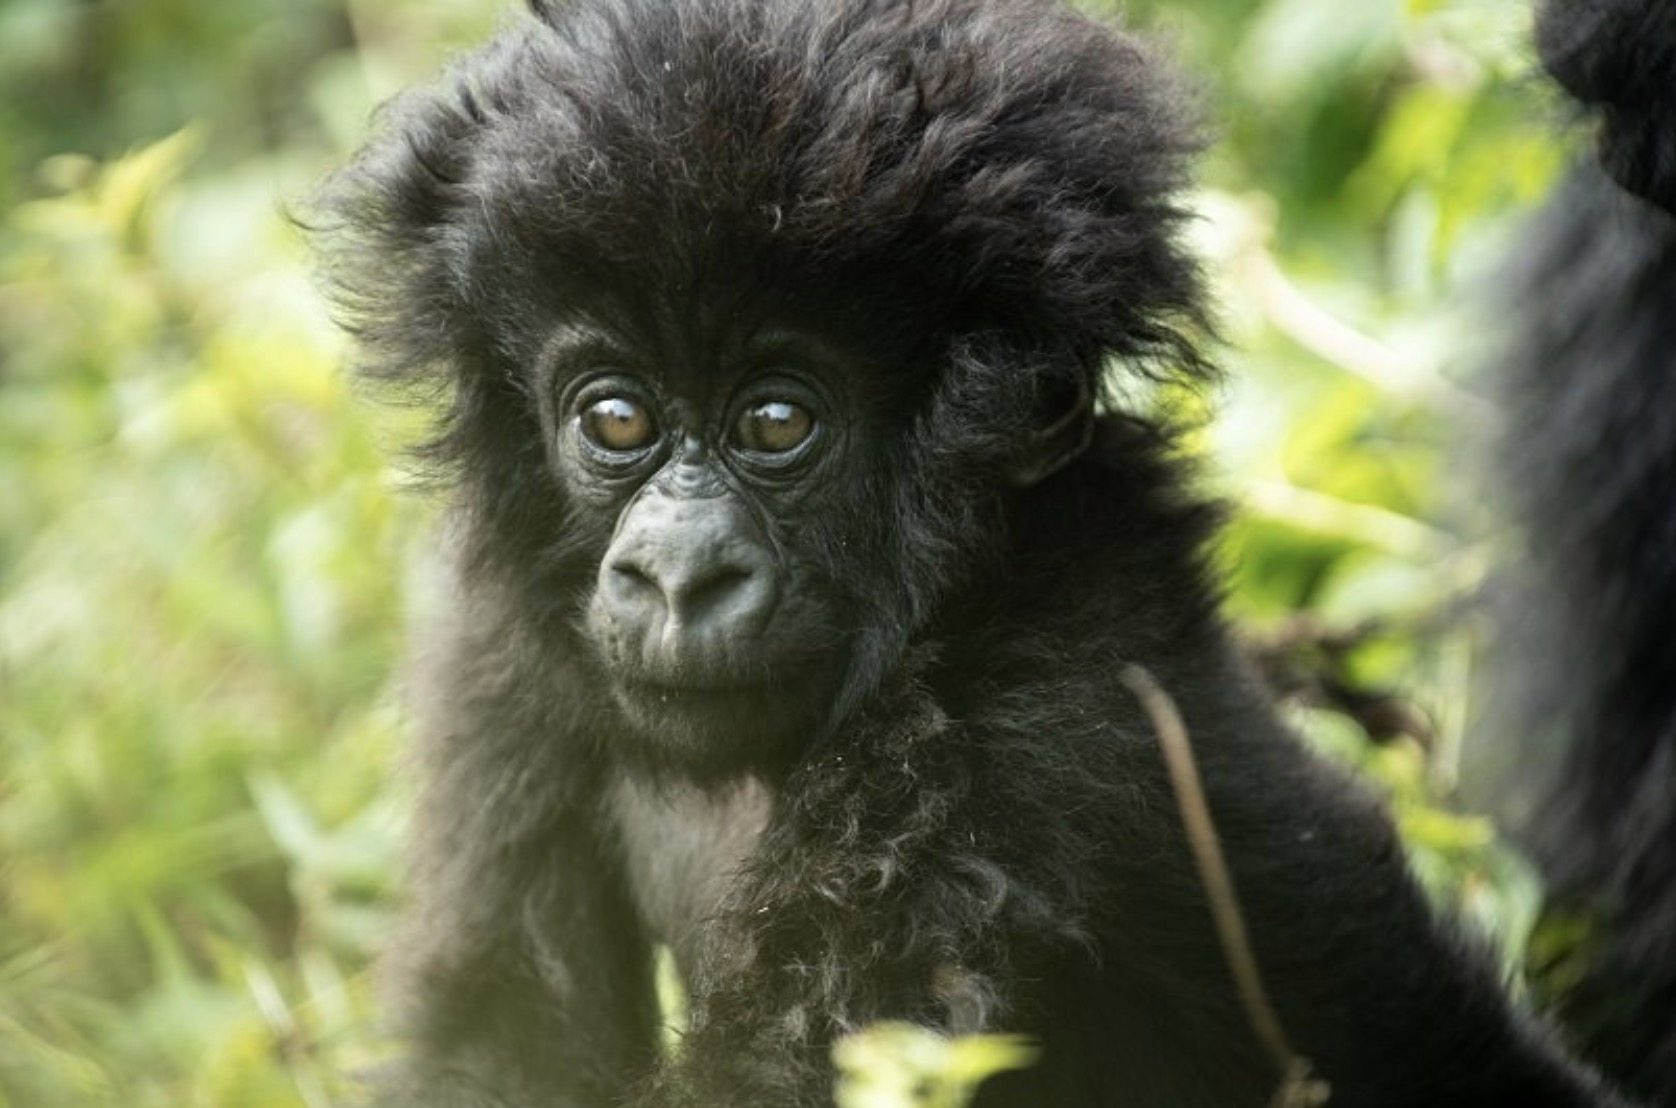 The Rwandan tradition of  baby-naming ceremonies has been extended to gorillas, and the annual event draws celebrities and local villagers. Photo: Visit Rwanda